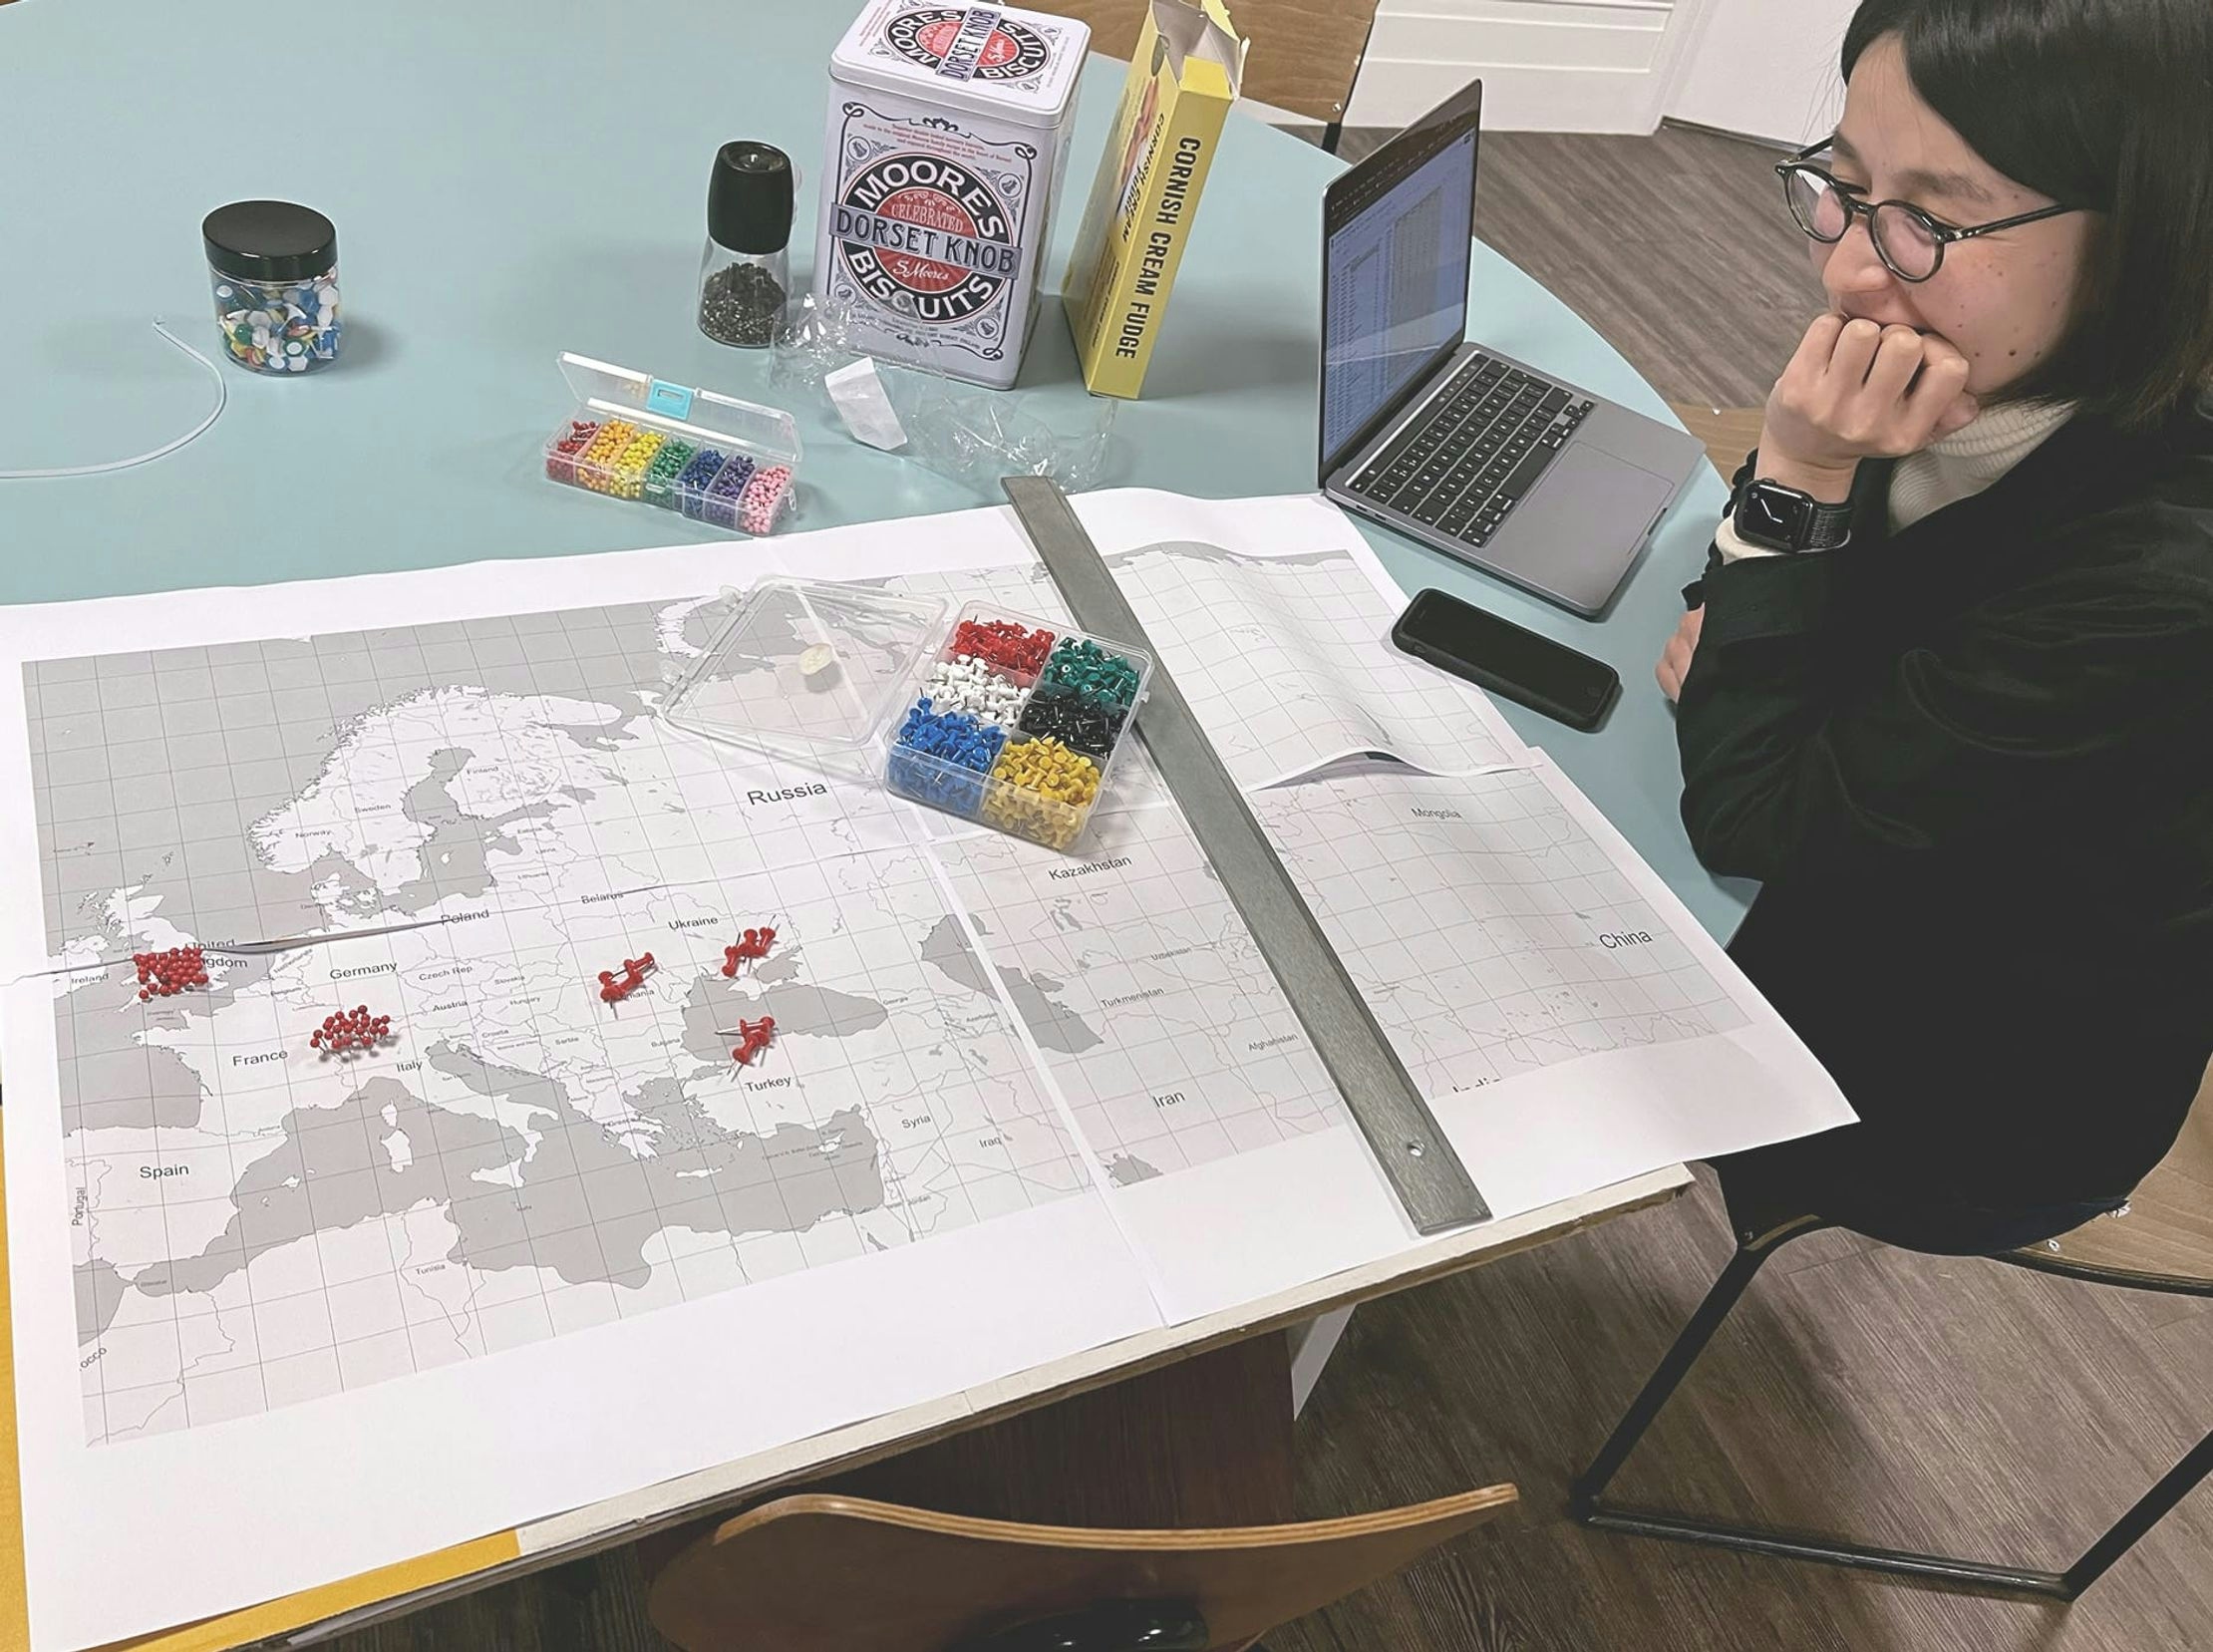 A designer sits at a table with a laptop, paper map of Europe and a box of pins. The map already has several red pins in it as they test fitting all the pins on the map.